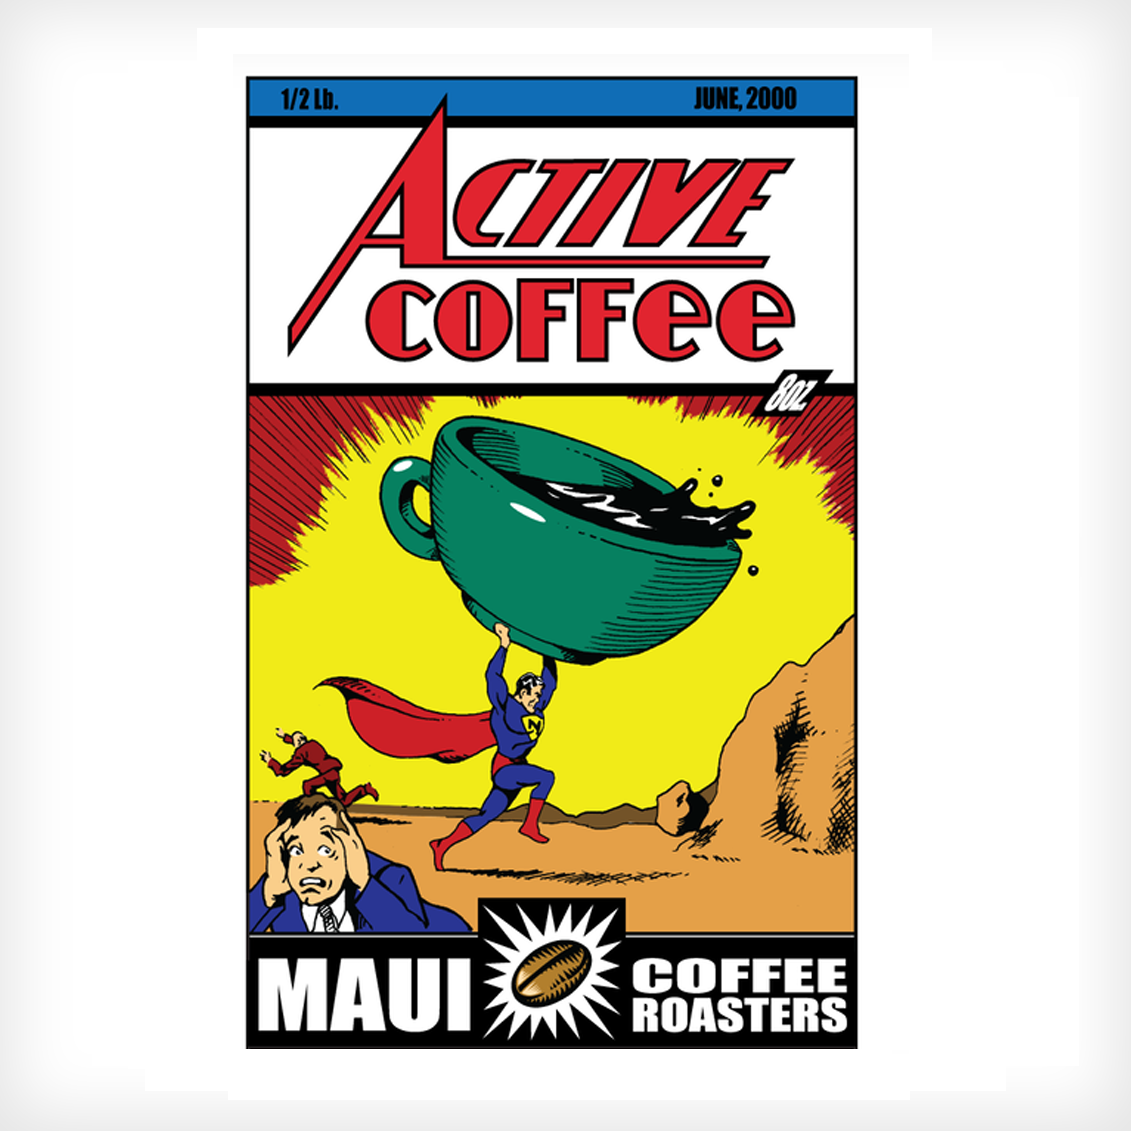 Maui Coffee Roasters Promotional Poster